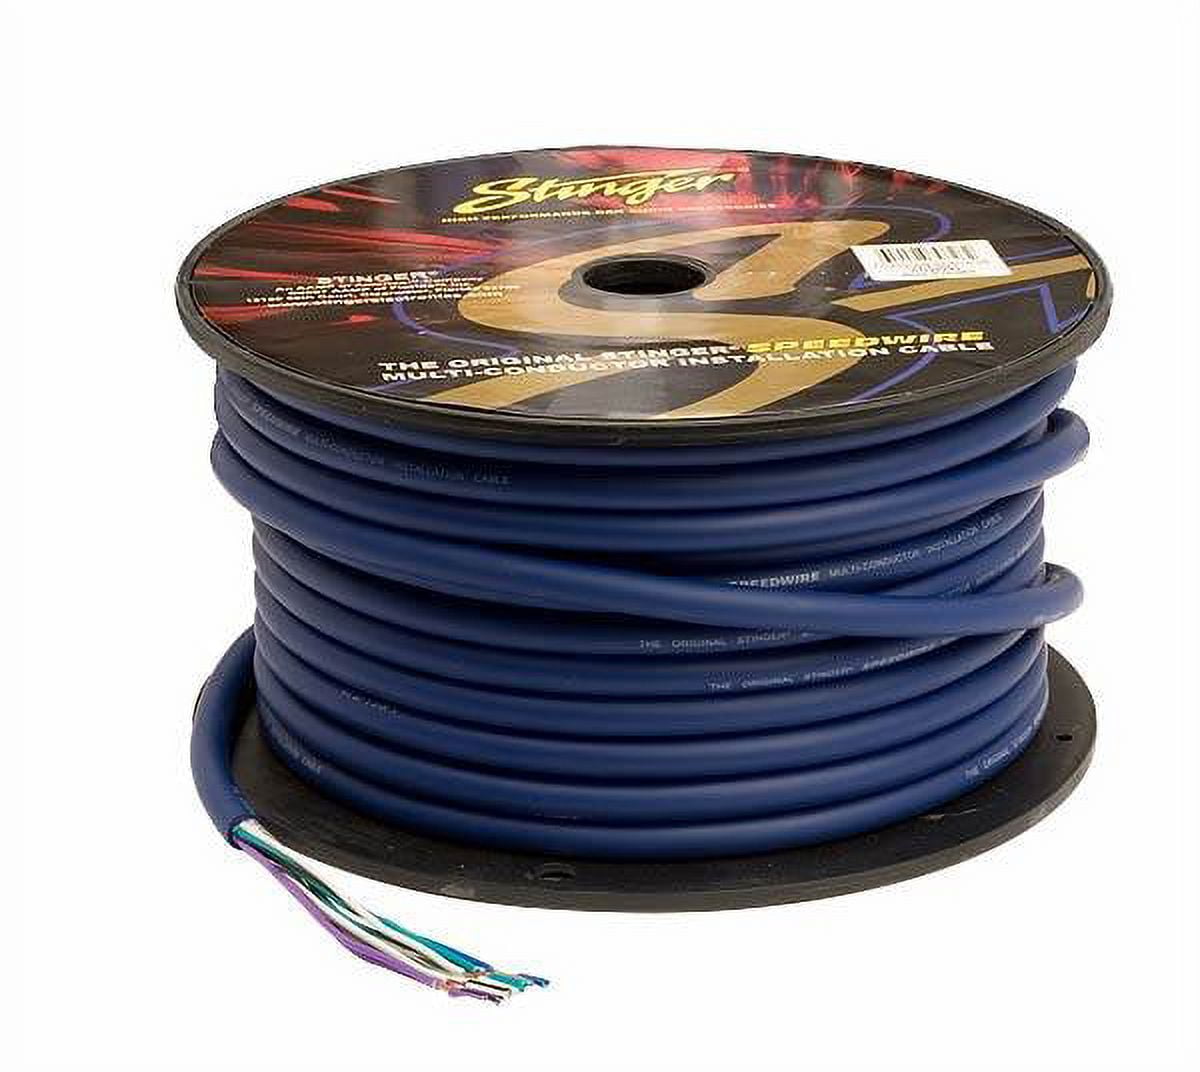 6 Color 16 GA Gauge Wire Kit Stranded Pure Copper Power Primary Amp Cable 